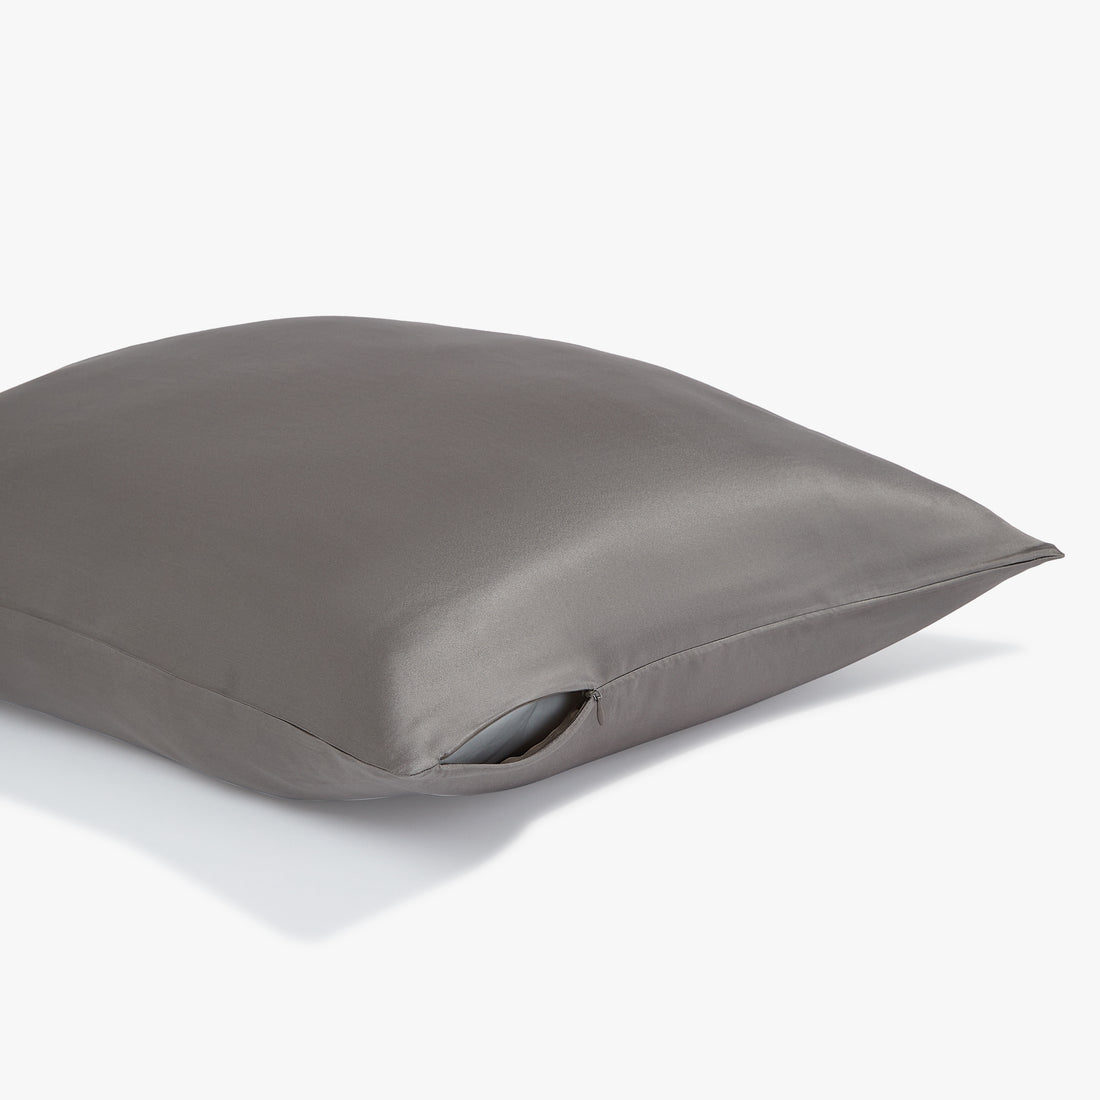 Side view of a gray pillowcase with zipper